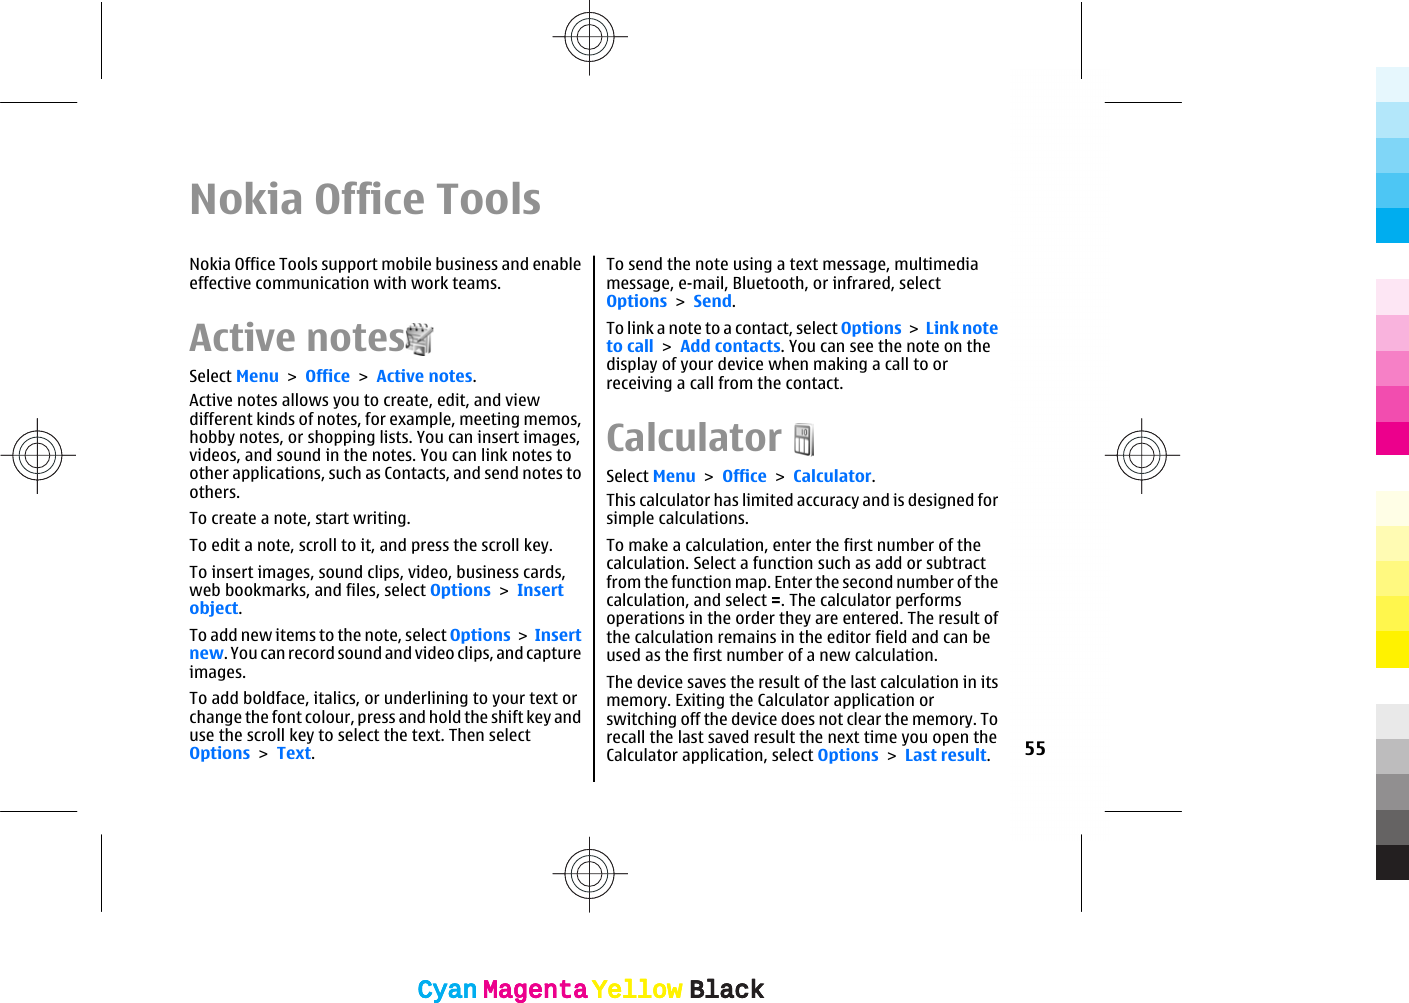 Nokia Office ToolsNokia Office Tools support mobile business and enableeffective communication with work teams.Active notesSelect Menu &gt; Office &gt; Active notes.Active notes allows you to create, edit, and viewdifferent kinds of notes, for example, meeting memos,hobby notes, or shopping lists. You can insert images,videos, and sound in the notes. You can link notes toother applications, such as Contacts, and send notes toothers.To create a note, start writing.To edit a note, scroll to it, and press the scroll key.To insert images, sound clips, video, business cards,web bookmarks, and files, select Options &gt; Insertobject.To add new items to the note, select Options &gt; Insertnew. You can record sound and video clips, and captureimages.To add boldface, italics, or underlining to your text orchange the font colour, press and hold the shift key anduse the scroll key to select the text. Then selectOptions &gt; Text.To send the note using a text message, multimediamessage, e-mail, Bluetooth, or infrared, selectOptions &gt; Send.To link a note to a contact, select Options &gt; Link noteto call &gt; Add contacts. You can see the note on thedisplay of your device when making a call to orreceiving a call from the contact.CalculatorSelect Menu &gt; Office &gt; Calculator.This calculator has limited accuracy and is designed forsimple calculations.To make a calculation, enter the first number of thecalculation. Select a function such as add or subtractfrom the function map. Enter the second number of thecalculation, and select =. The calculator performsoperations in the order they are entered. The result ofthe calculation remains in the editor field and can beused as the first number of a new calculation.The device saves the result of the last calculation in itsmemory. Exiting the Calculator application orswitching off the device does not clear the memory. Torecall the last saved result the next time you open theCalculator application, select Options &gt; Last result.55CyanCyanMagentaMagentaYellowYellowBlackBlackCyanCyanMagentaMagentaYellowYellowBlackBlack